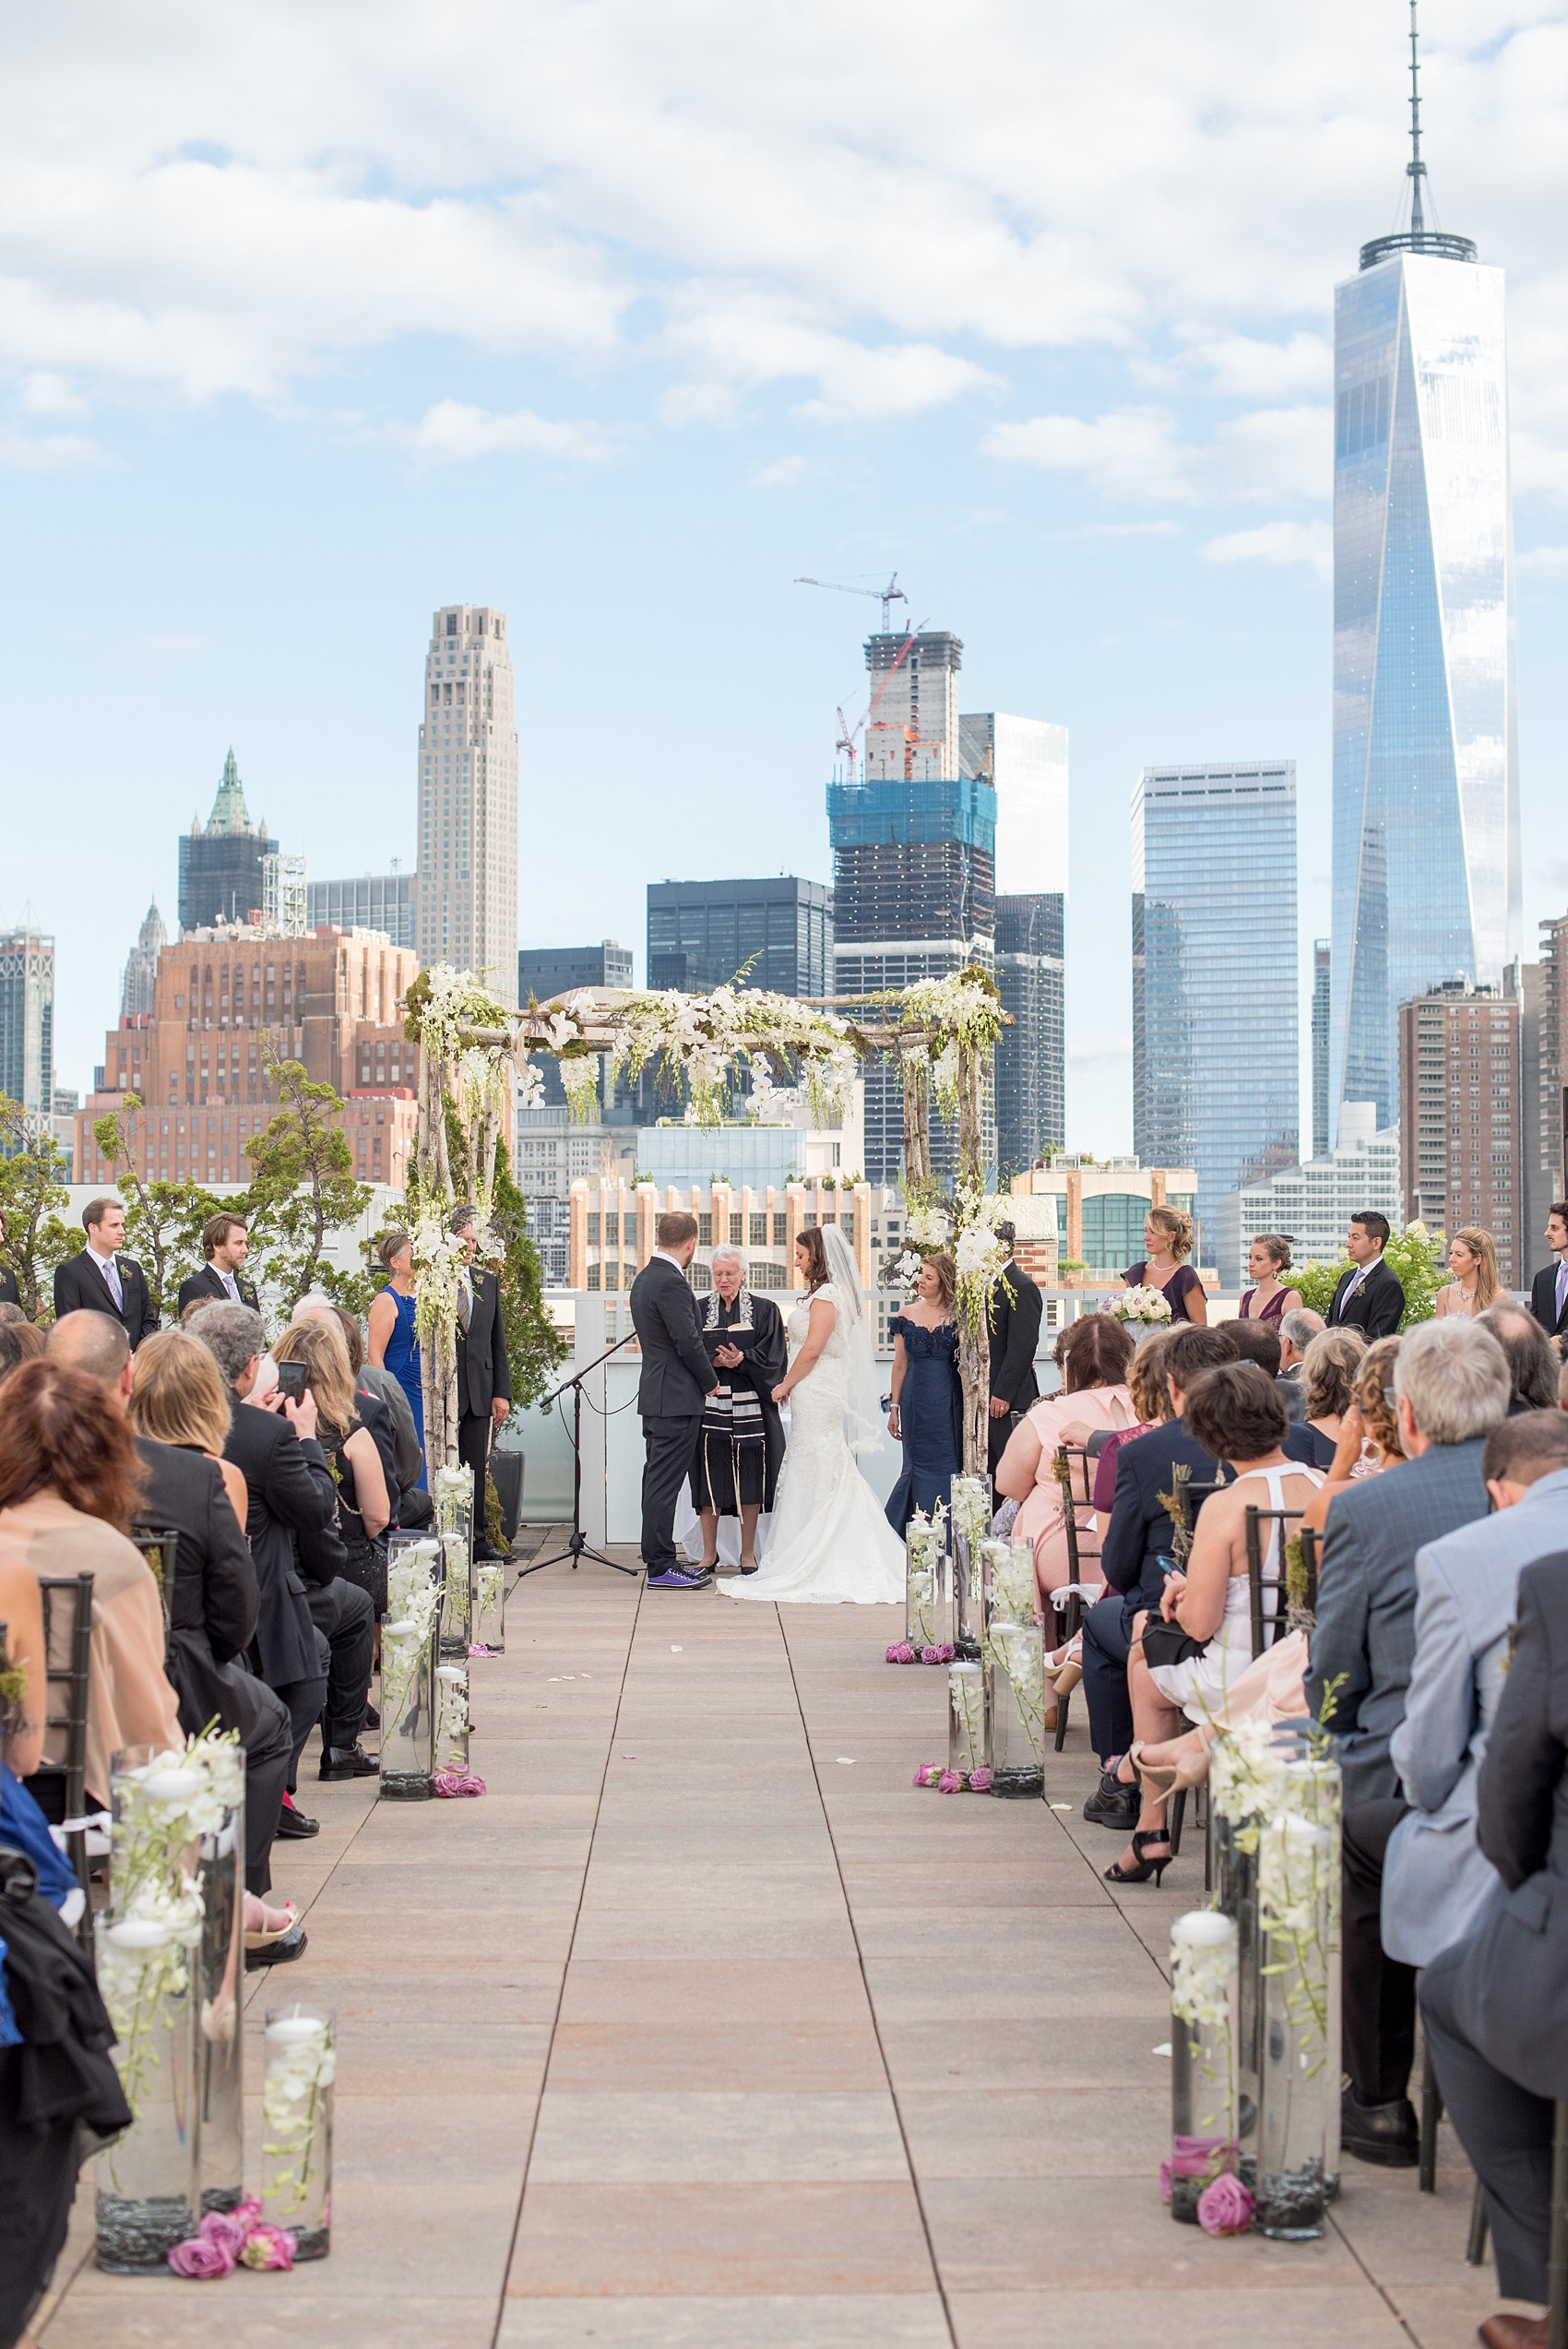 Mikkel Paige Photography photos of a NYC wedding at Tribeca Rooftop. An image of the outdoor ceremony with Freedom Tower in the background.